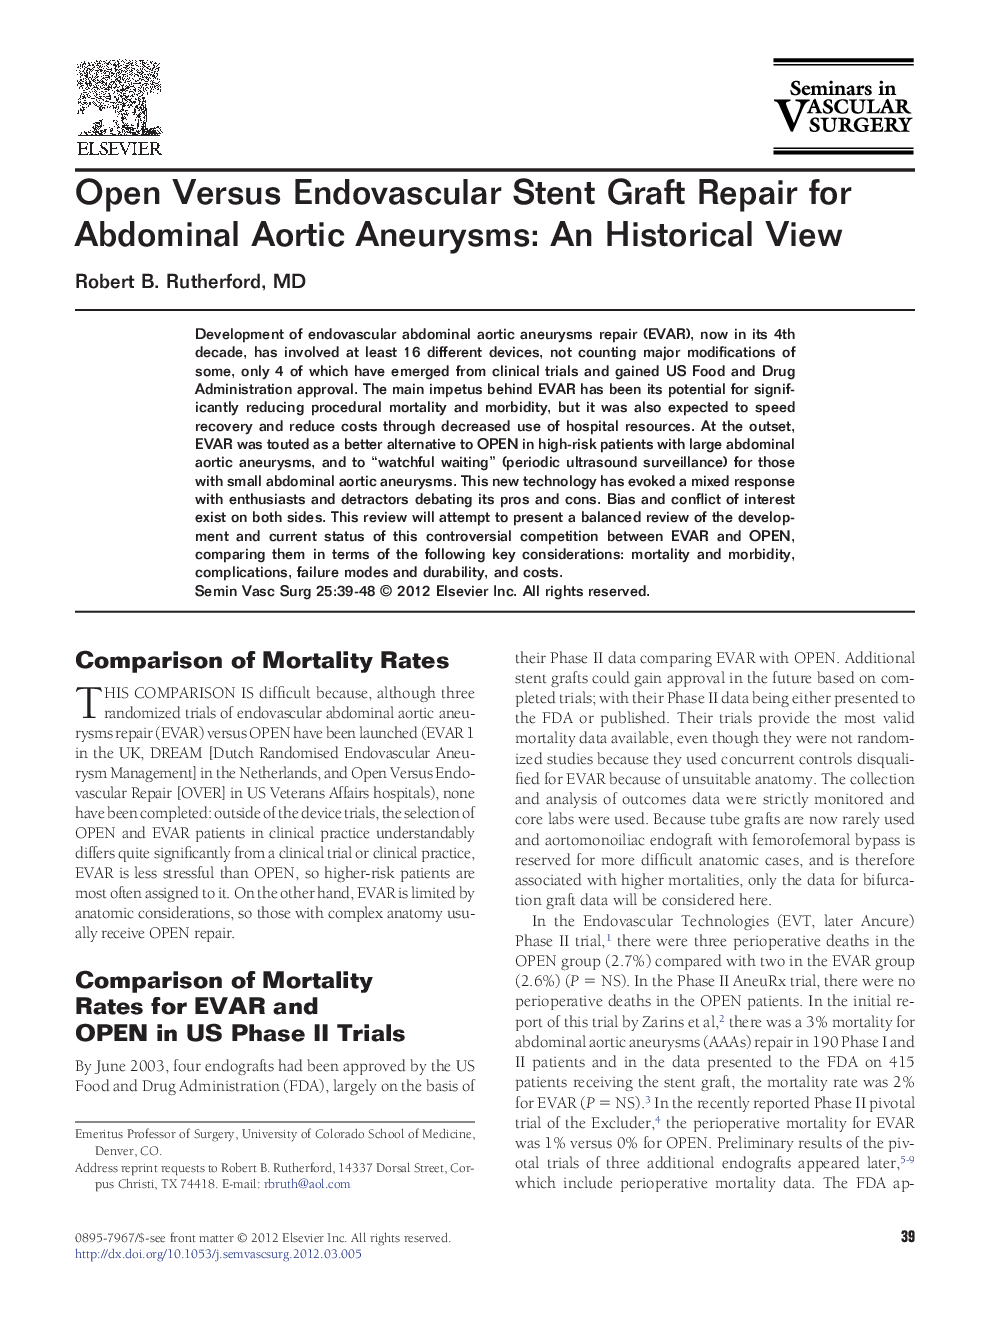 Open Versus Endovascular Stent Graft Repair for Abdominal Aortic Aneurysms: An Historical View